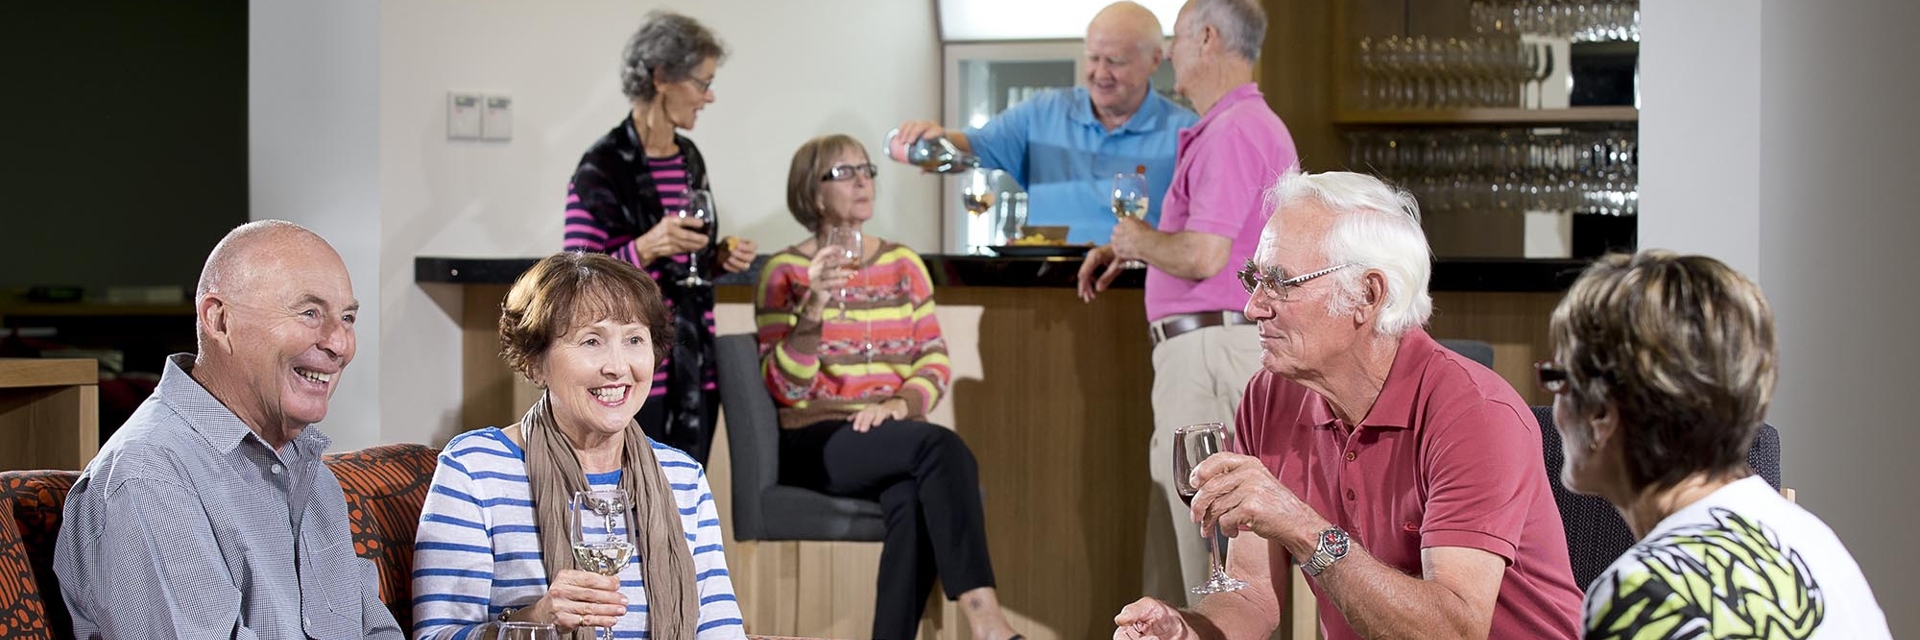 Group of homeowners enjoying each others company in the Rec Club over drinks and nibbles